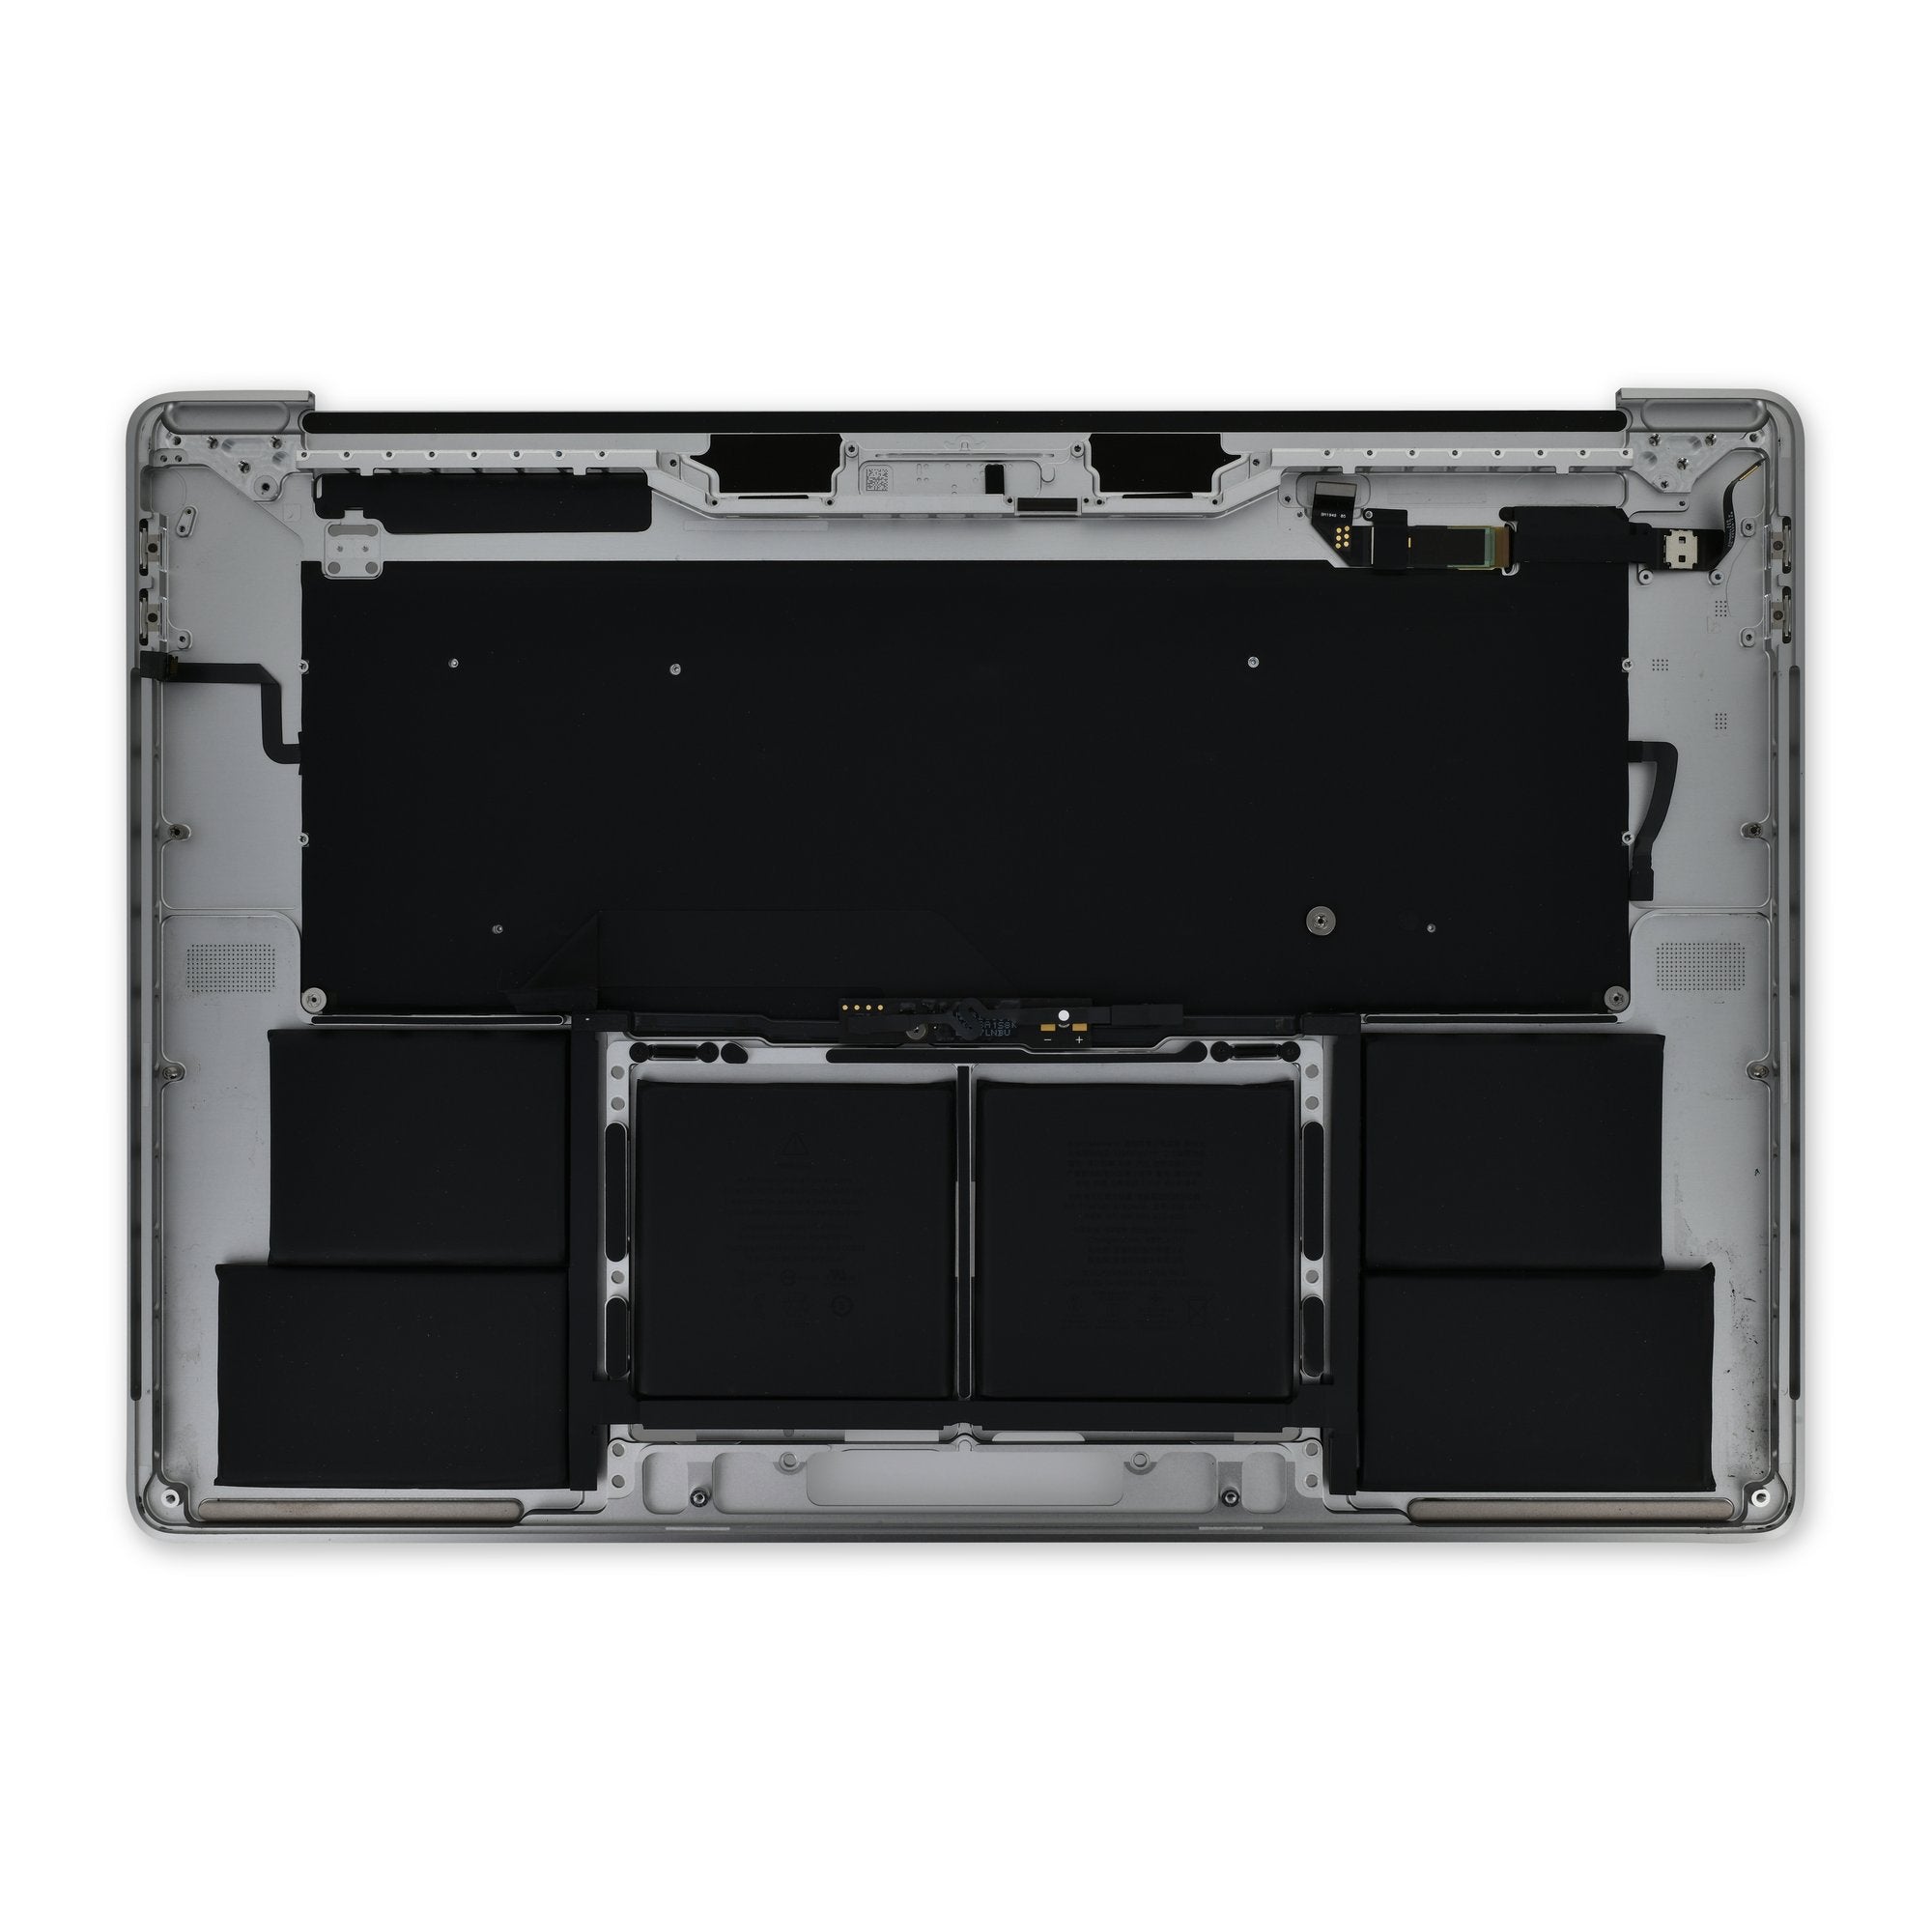 MacBook Pro 16" (2019) Upper Case Assembly and Battery Dark Gray Used, A-Stock